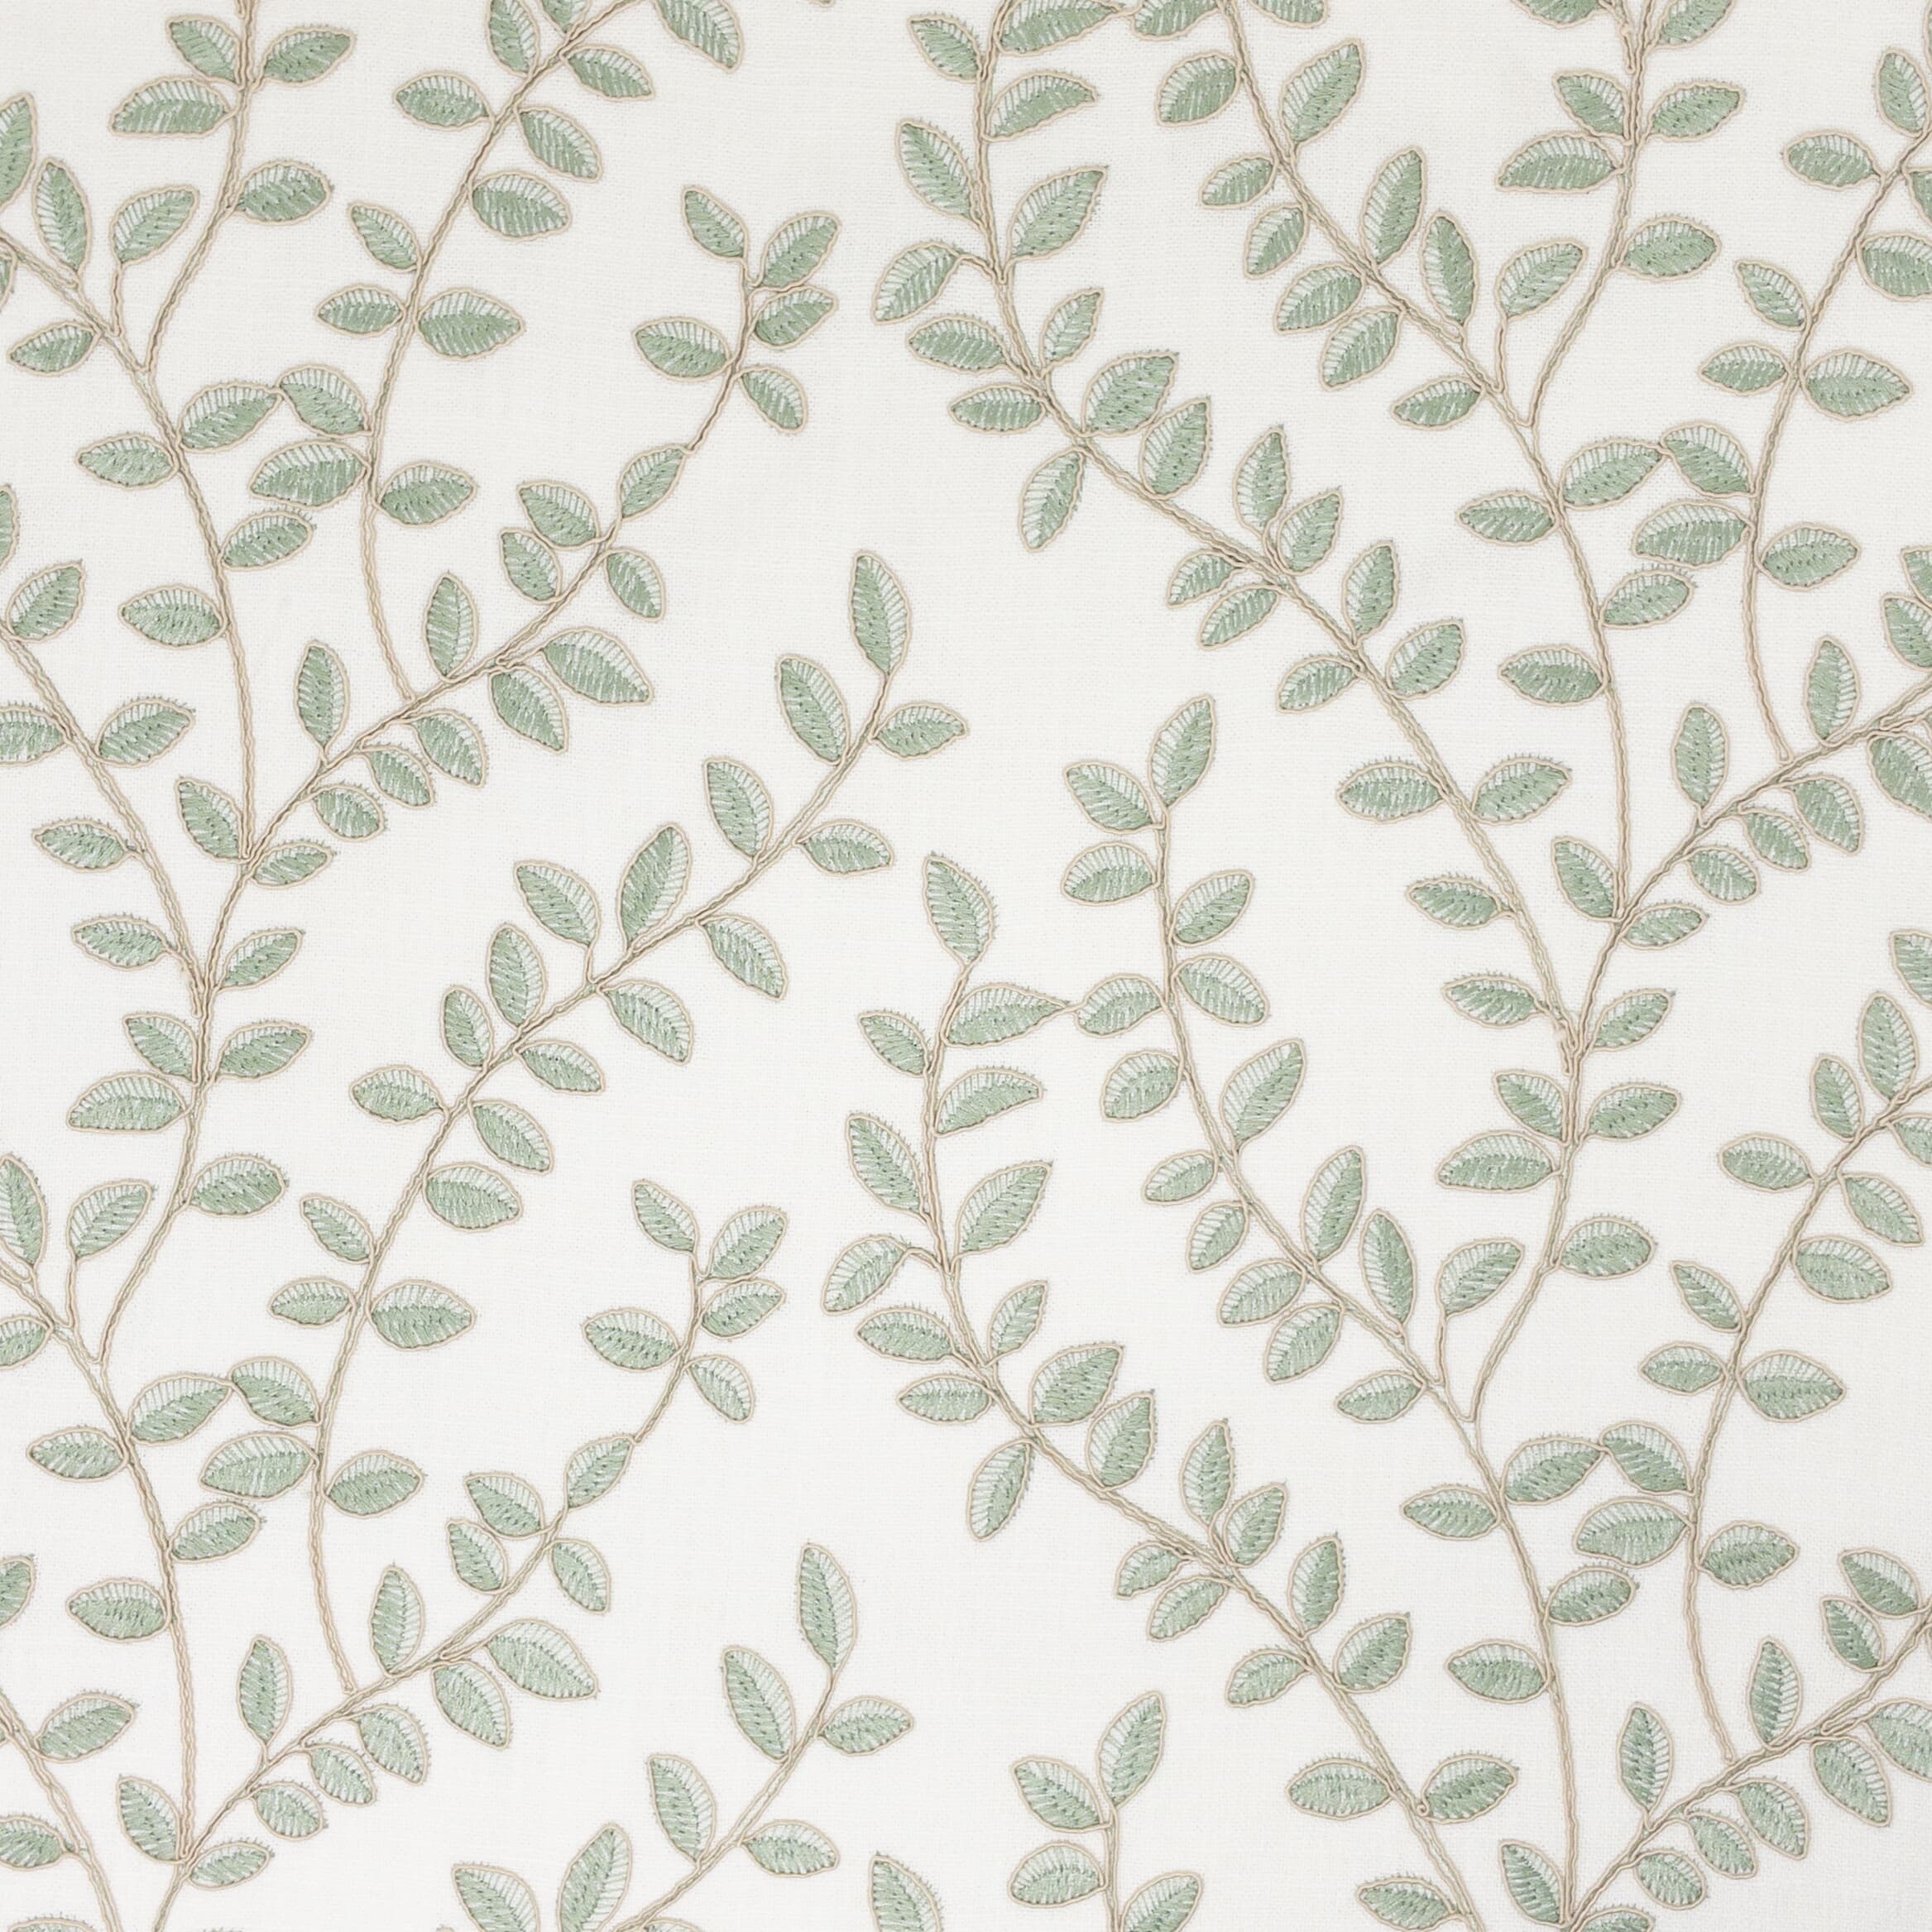 Creed 1 Aloe by Stout Fabric